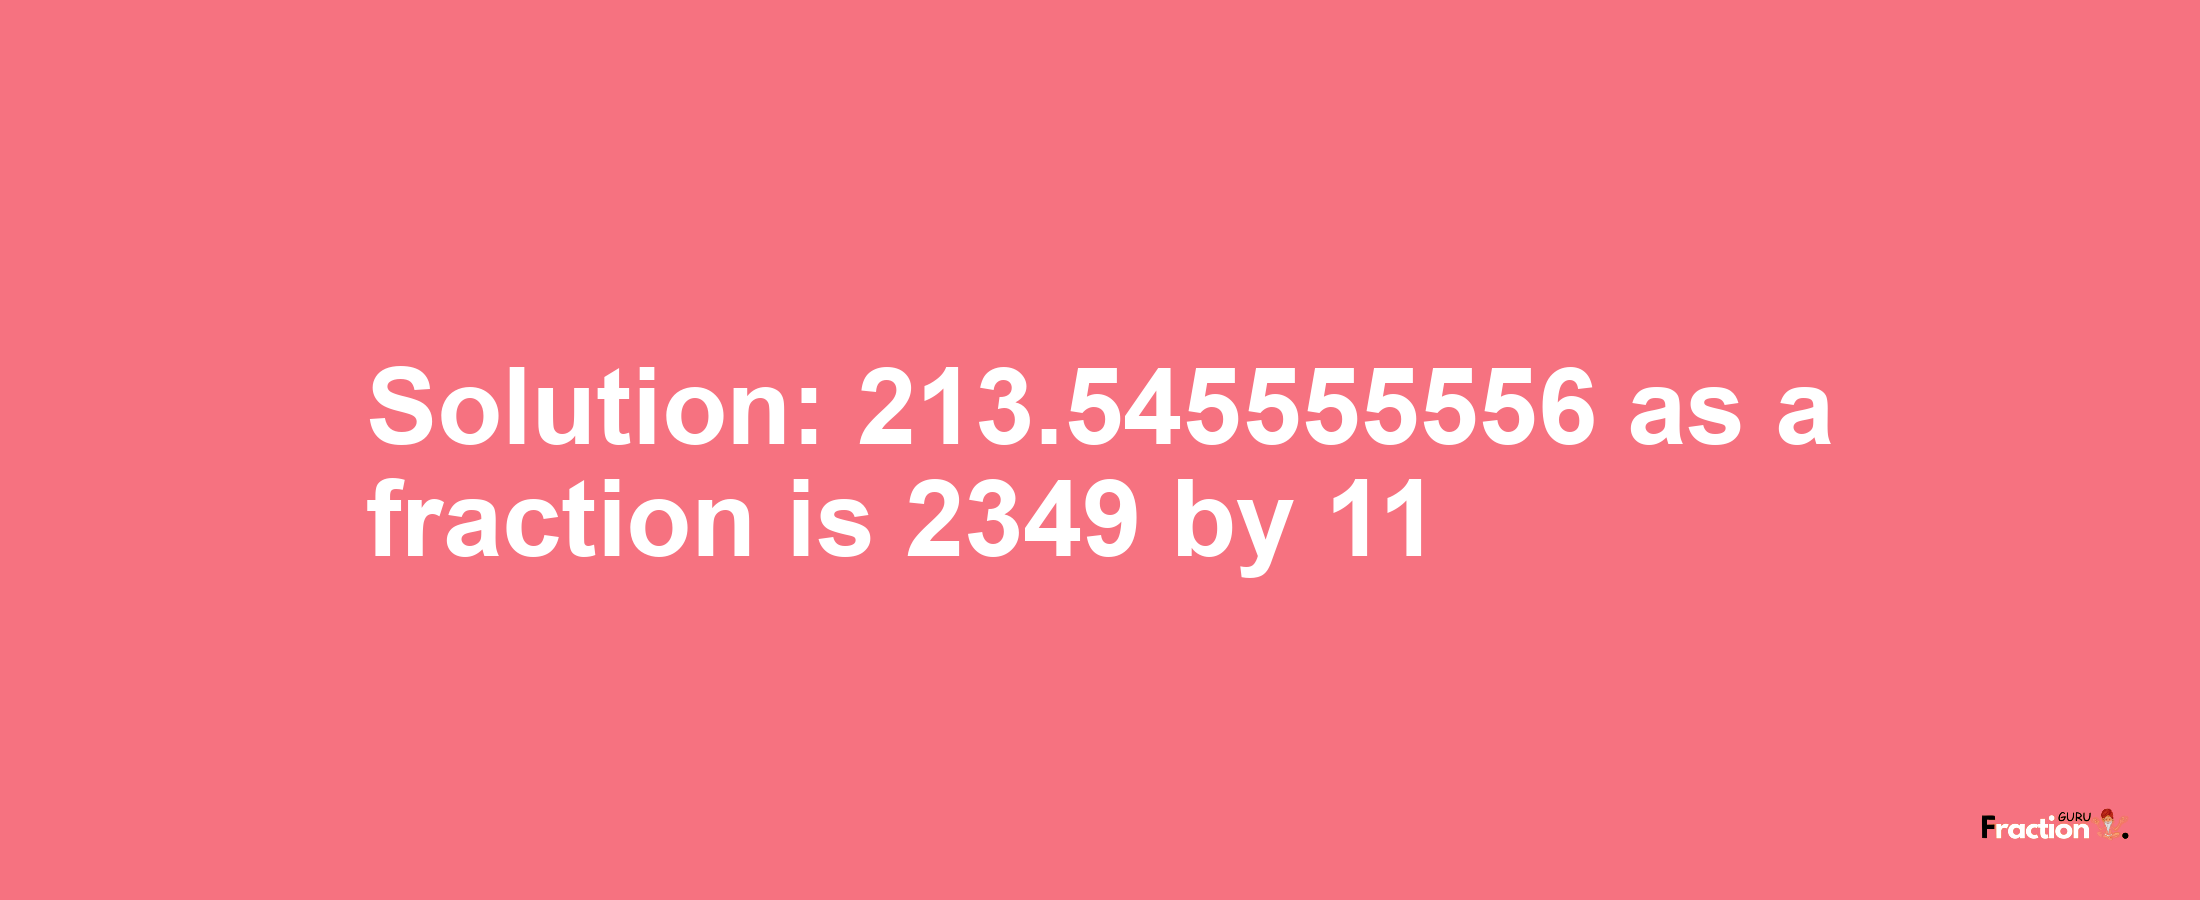 Solution:213.545555556 as a fraction is 2349/11